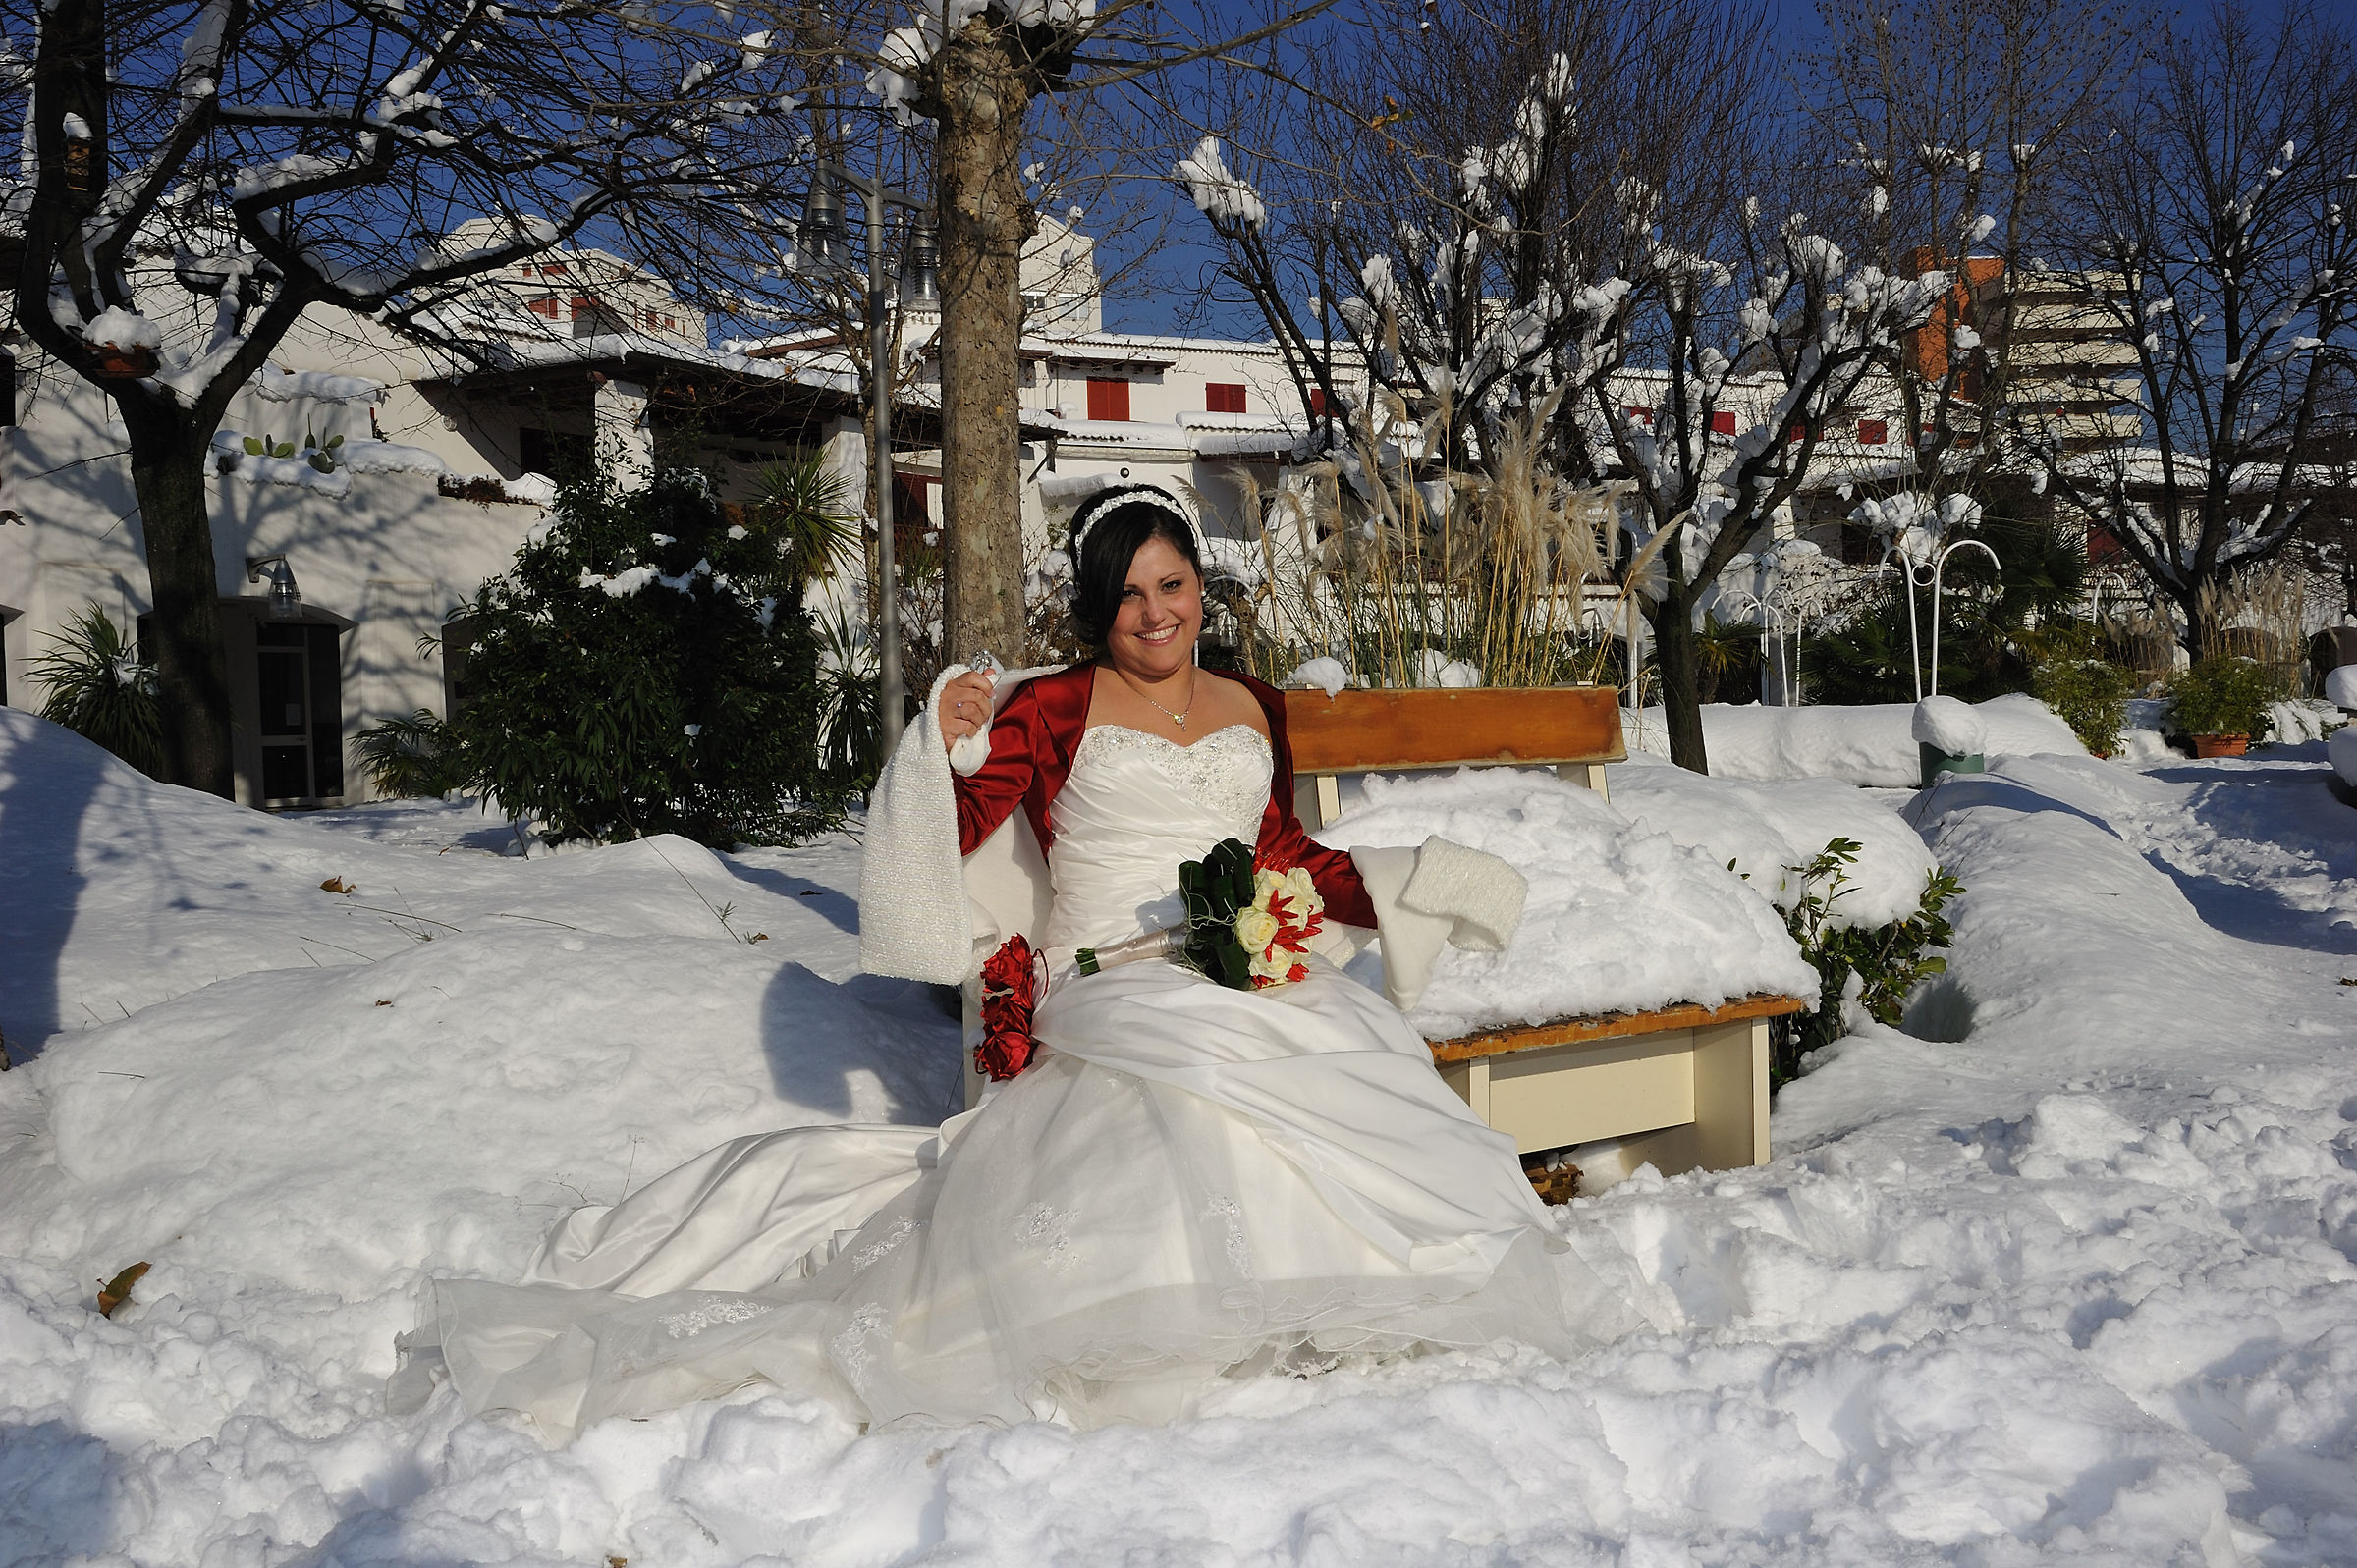 Wedding in the snow...